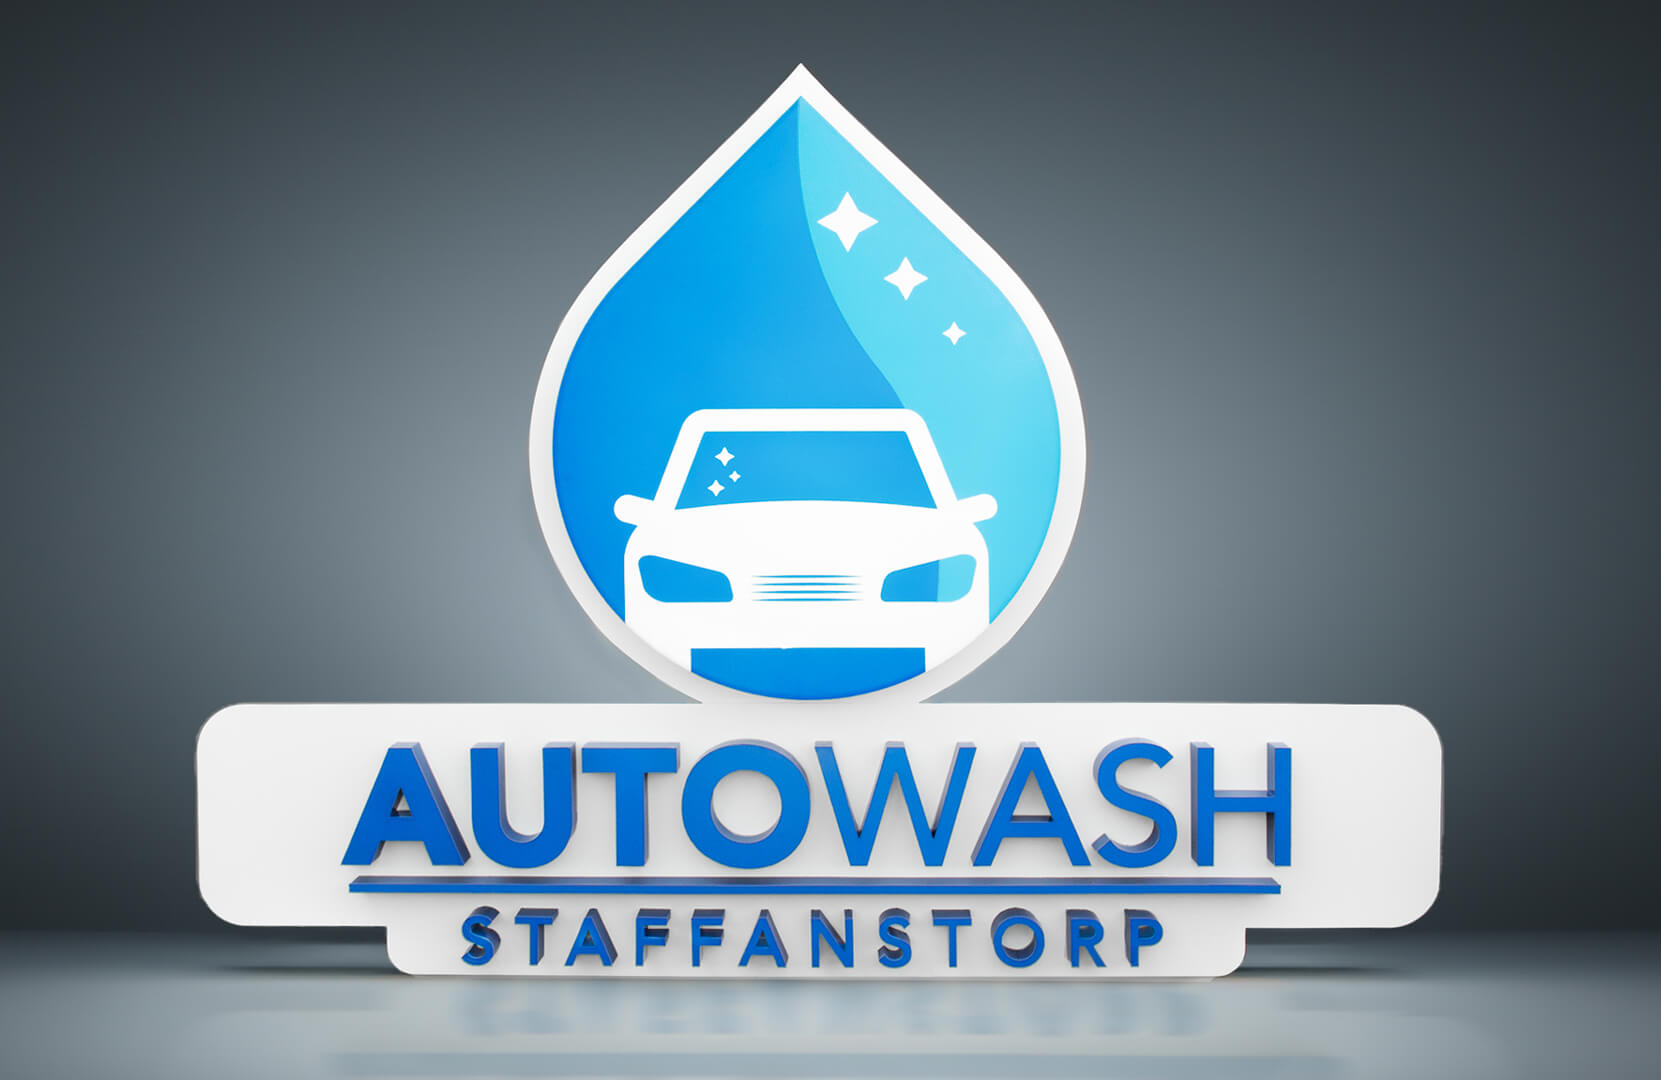 Autowash - LED light letters on the background along with the logo